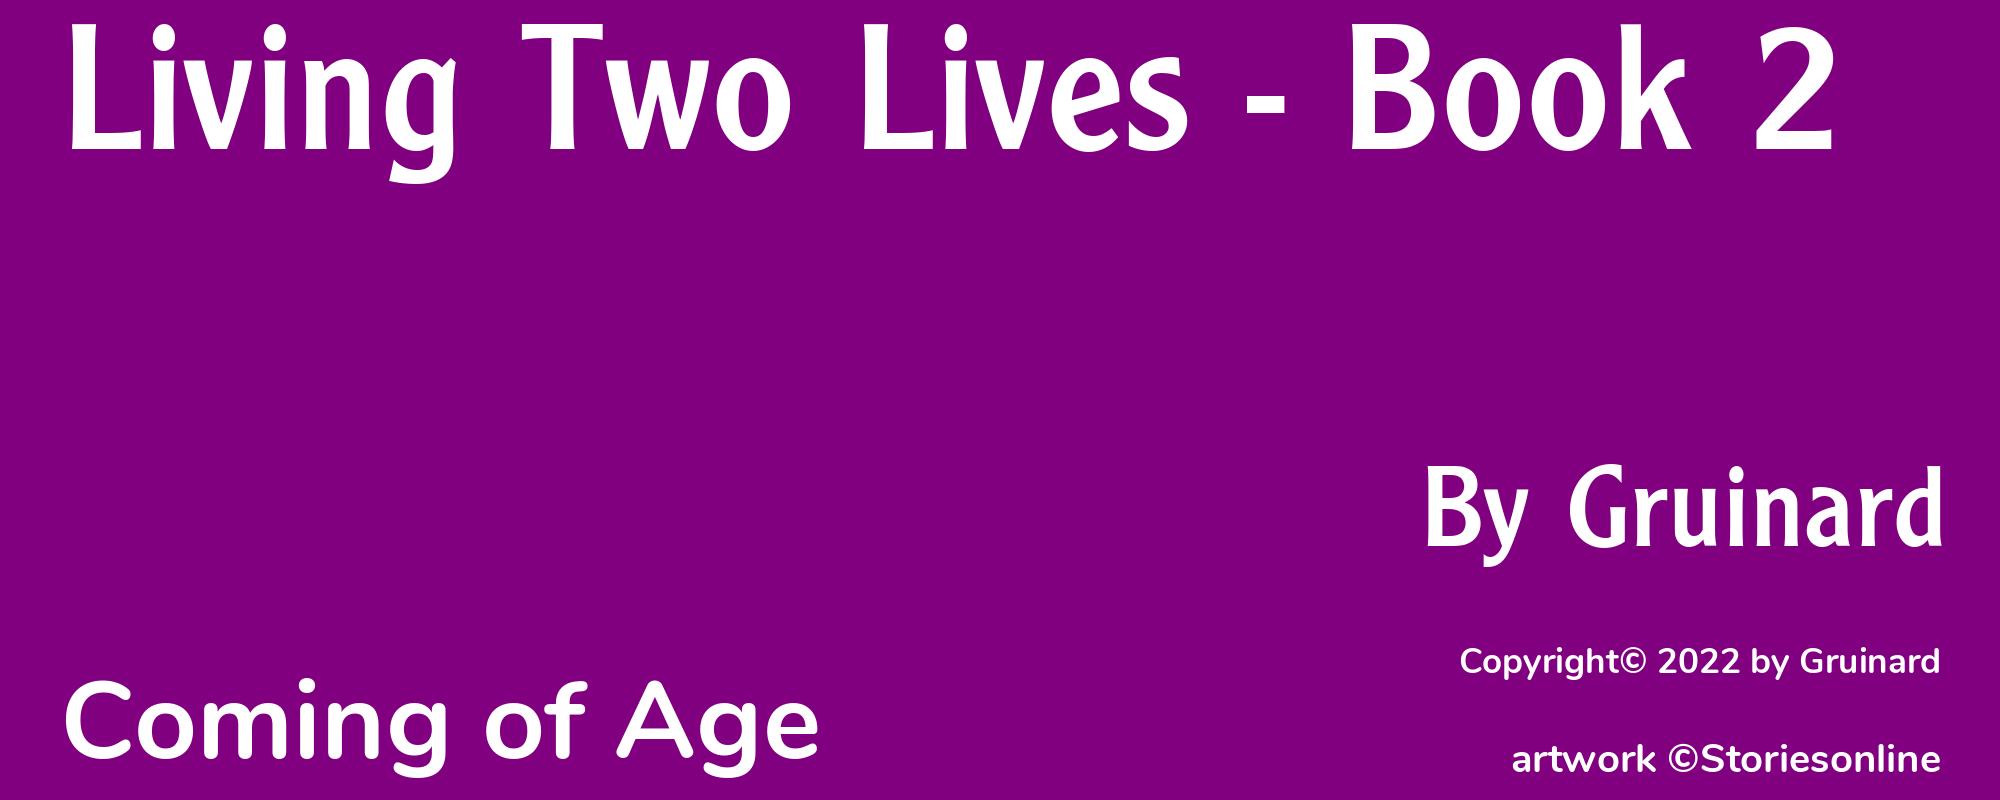 Living Two Lives - Book 2 - Cover